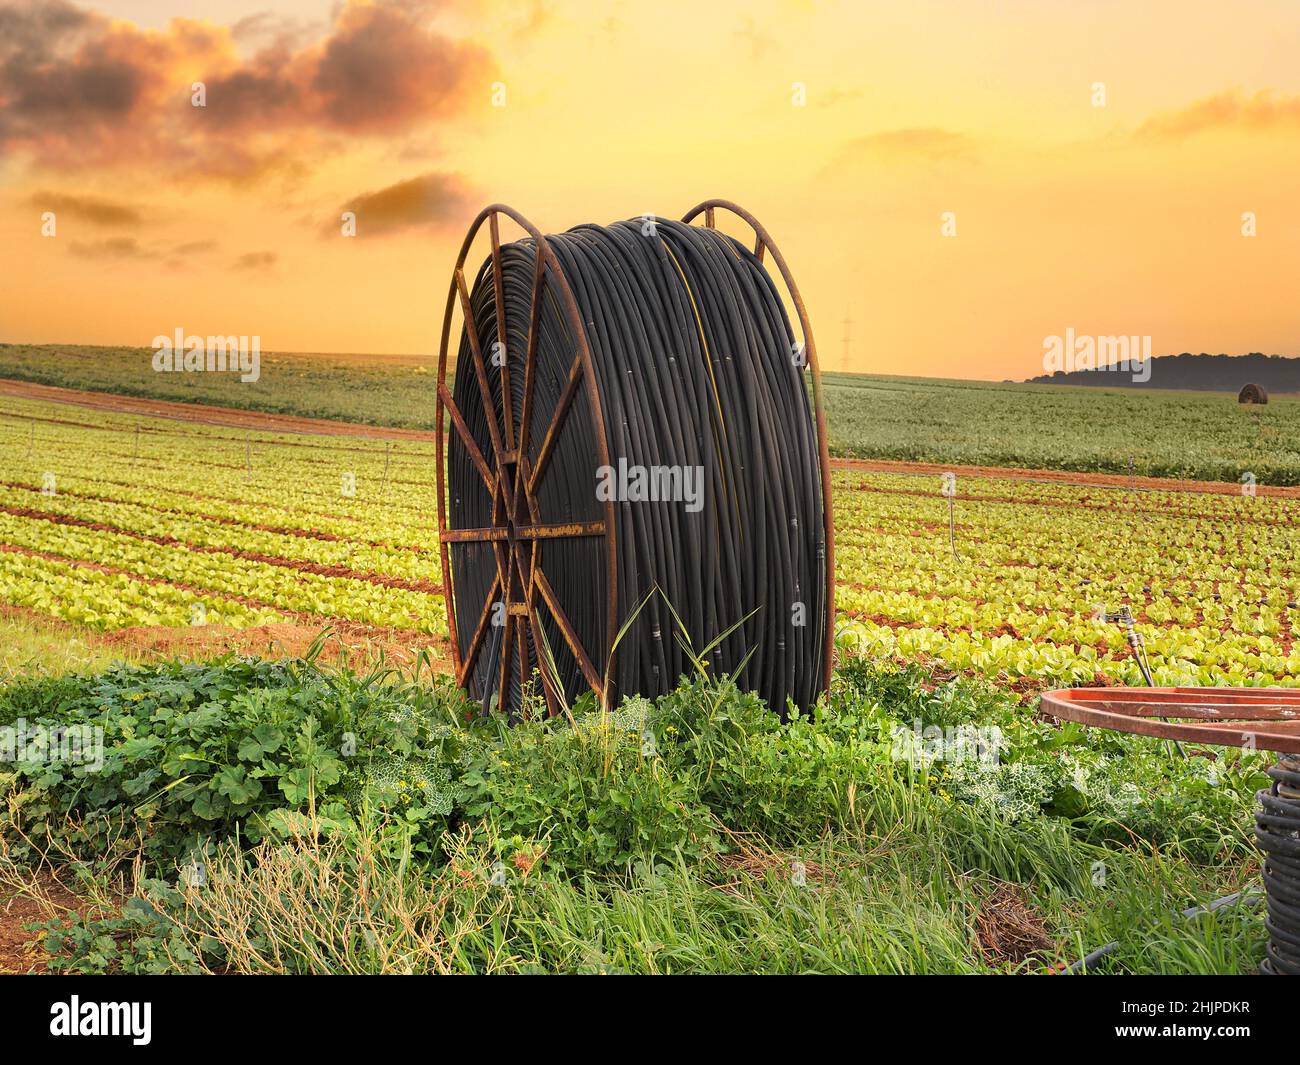 Hose reel for irrigation in the fields. Israeli agriculture. Stock Photo